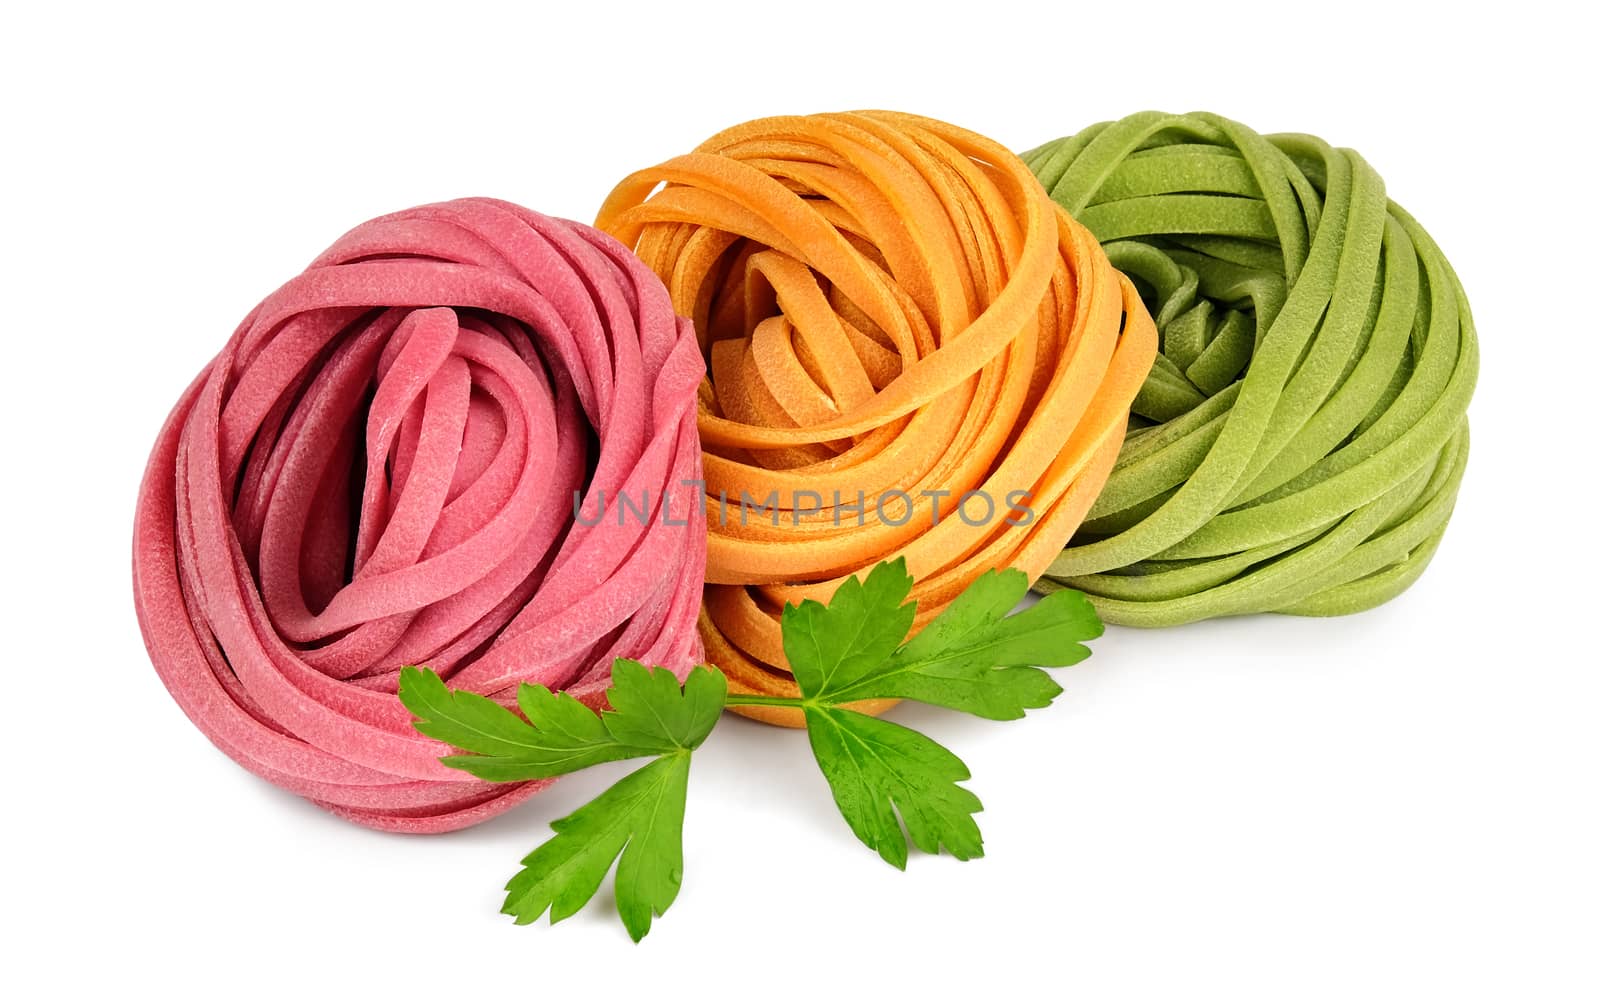 Colored fettuccine pasta and parsley. by leventina